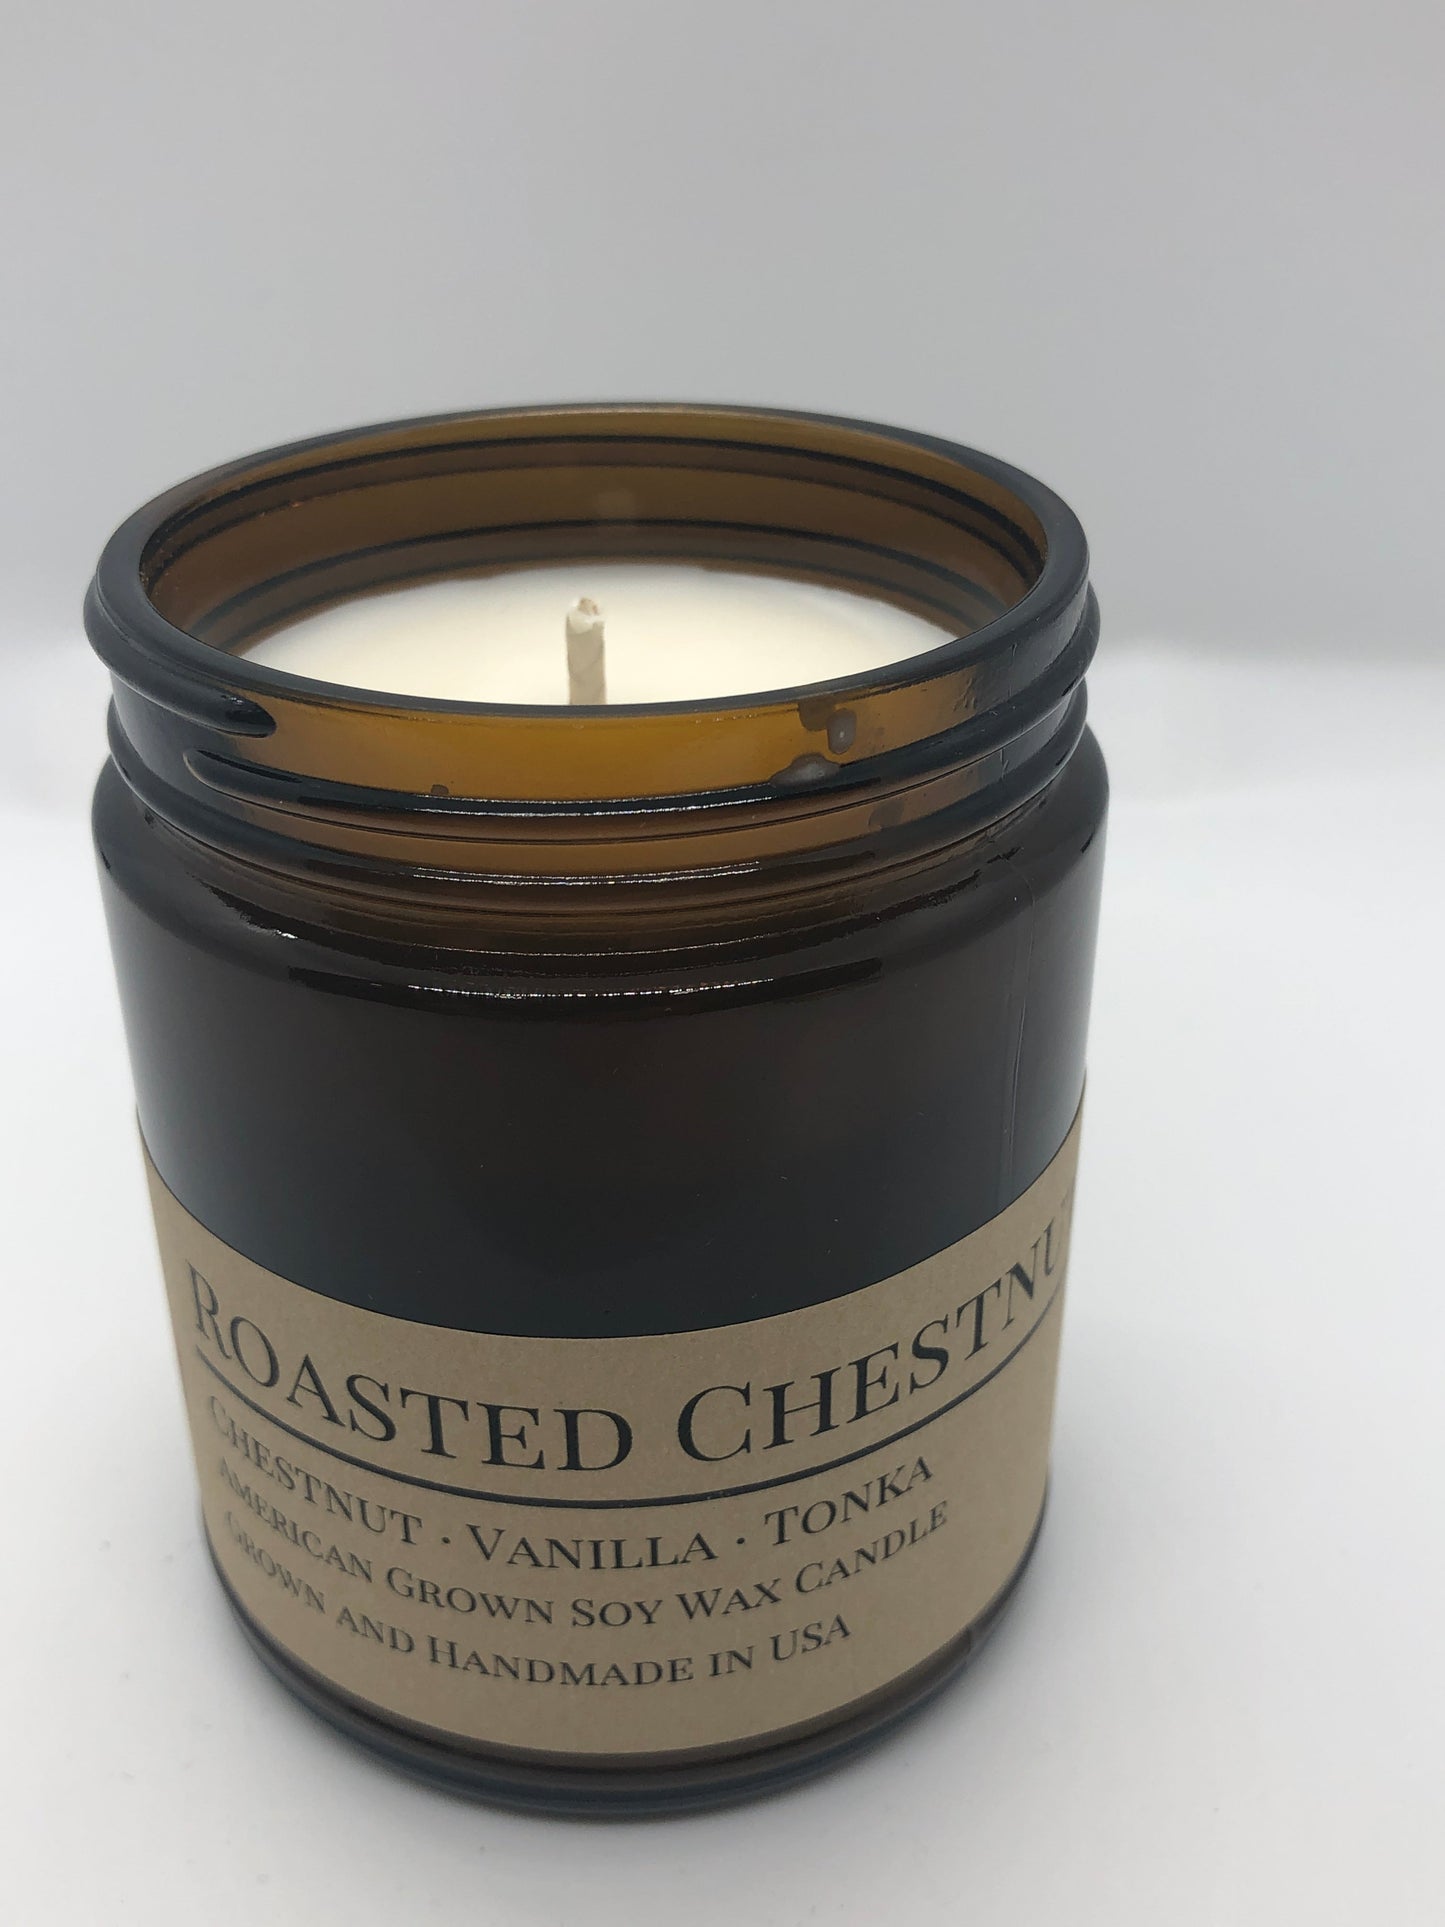 Roasted Chestnut Soy Candle | 9 oz Amber Apothecary Jar